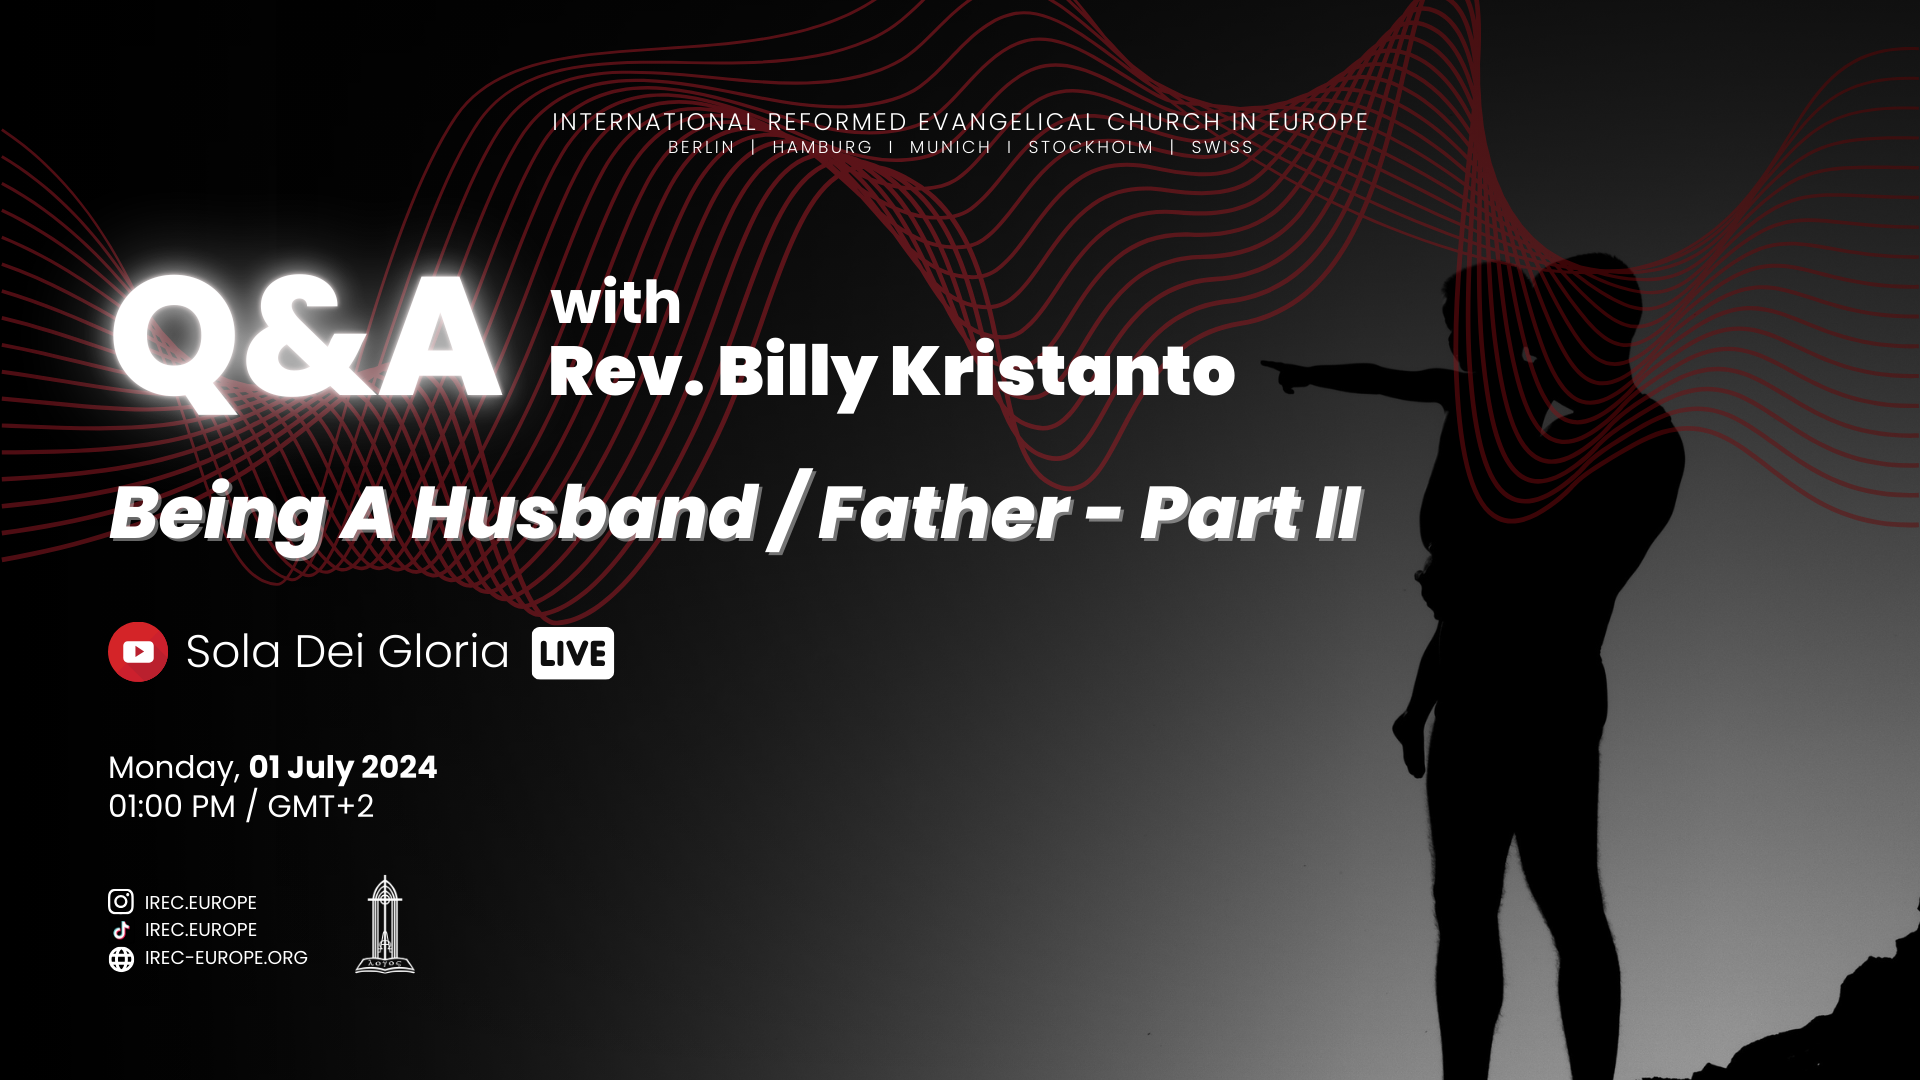 Q&A: Being A Husband / Father - Part II